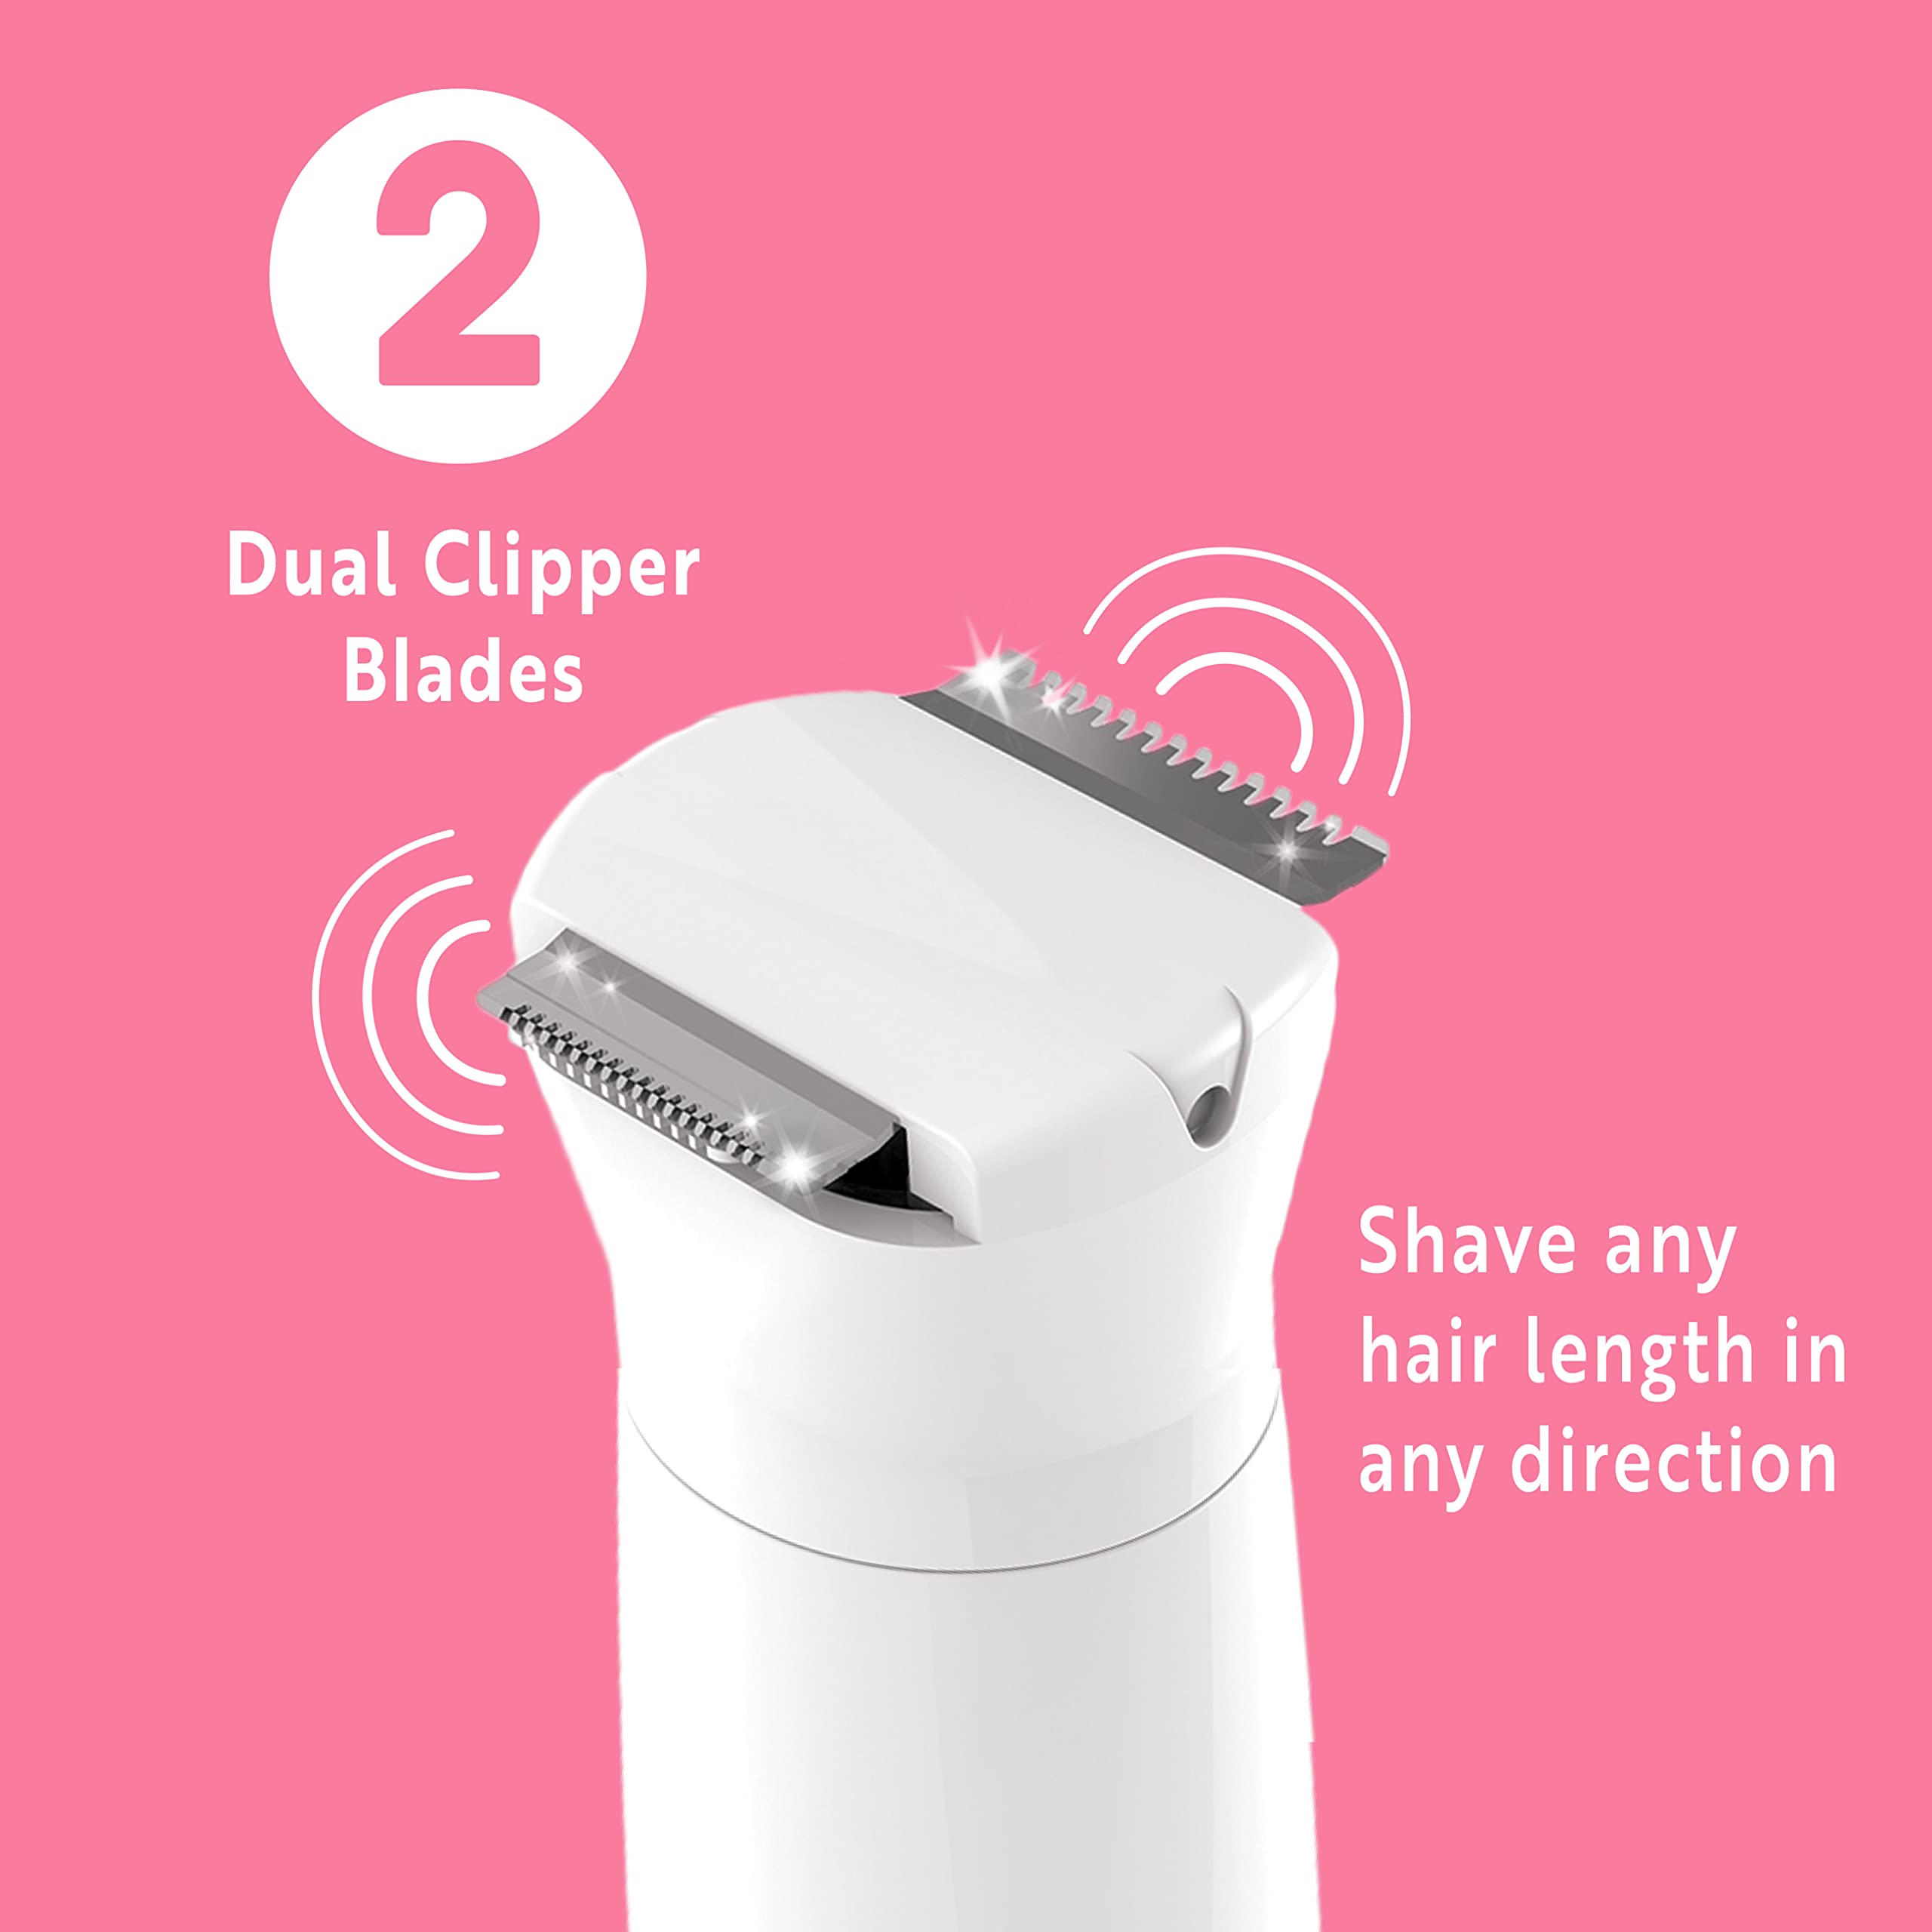 palmperfect Clio PALMPERFECT Bikini Trimmer for Women - Wet & Dry Hair Trimmer with Dual Blades - Cordless Hair Removal Electric Razor for A